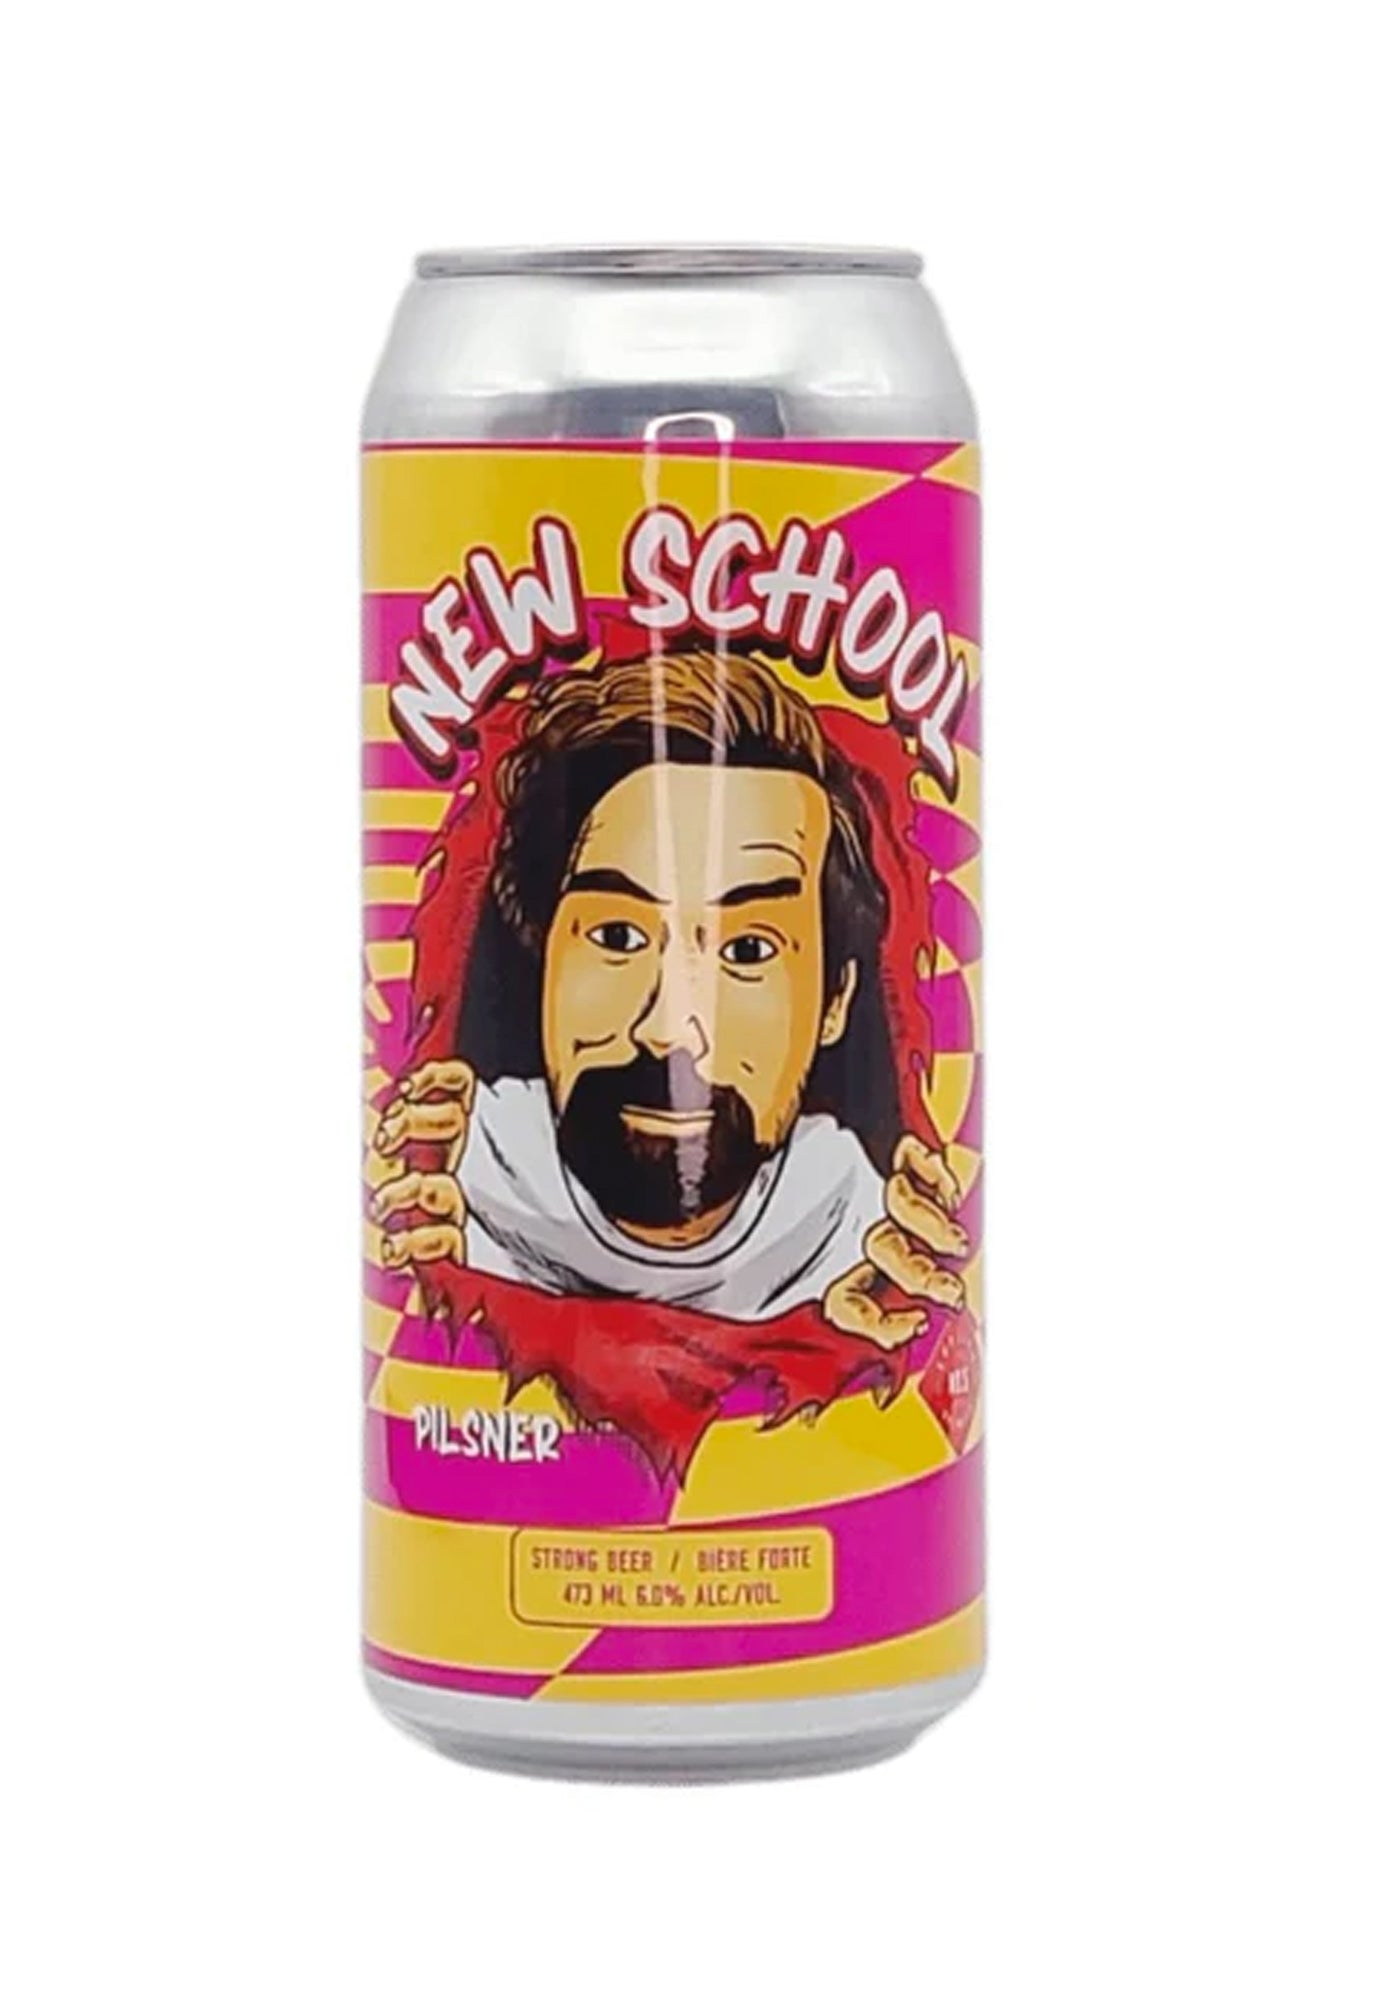 Trolley 5 New School Pilsner 473 ml - 4 Cans